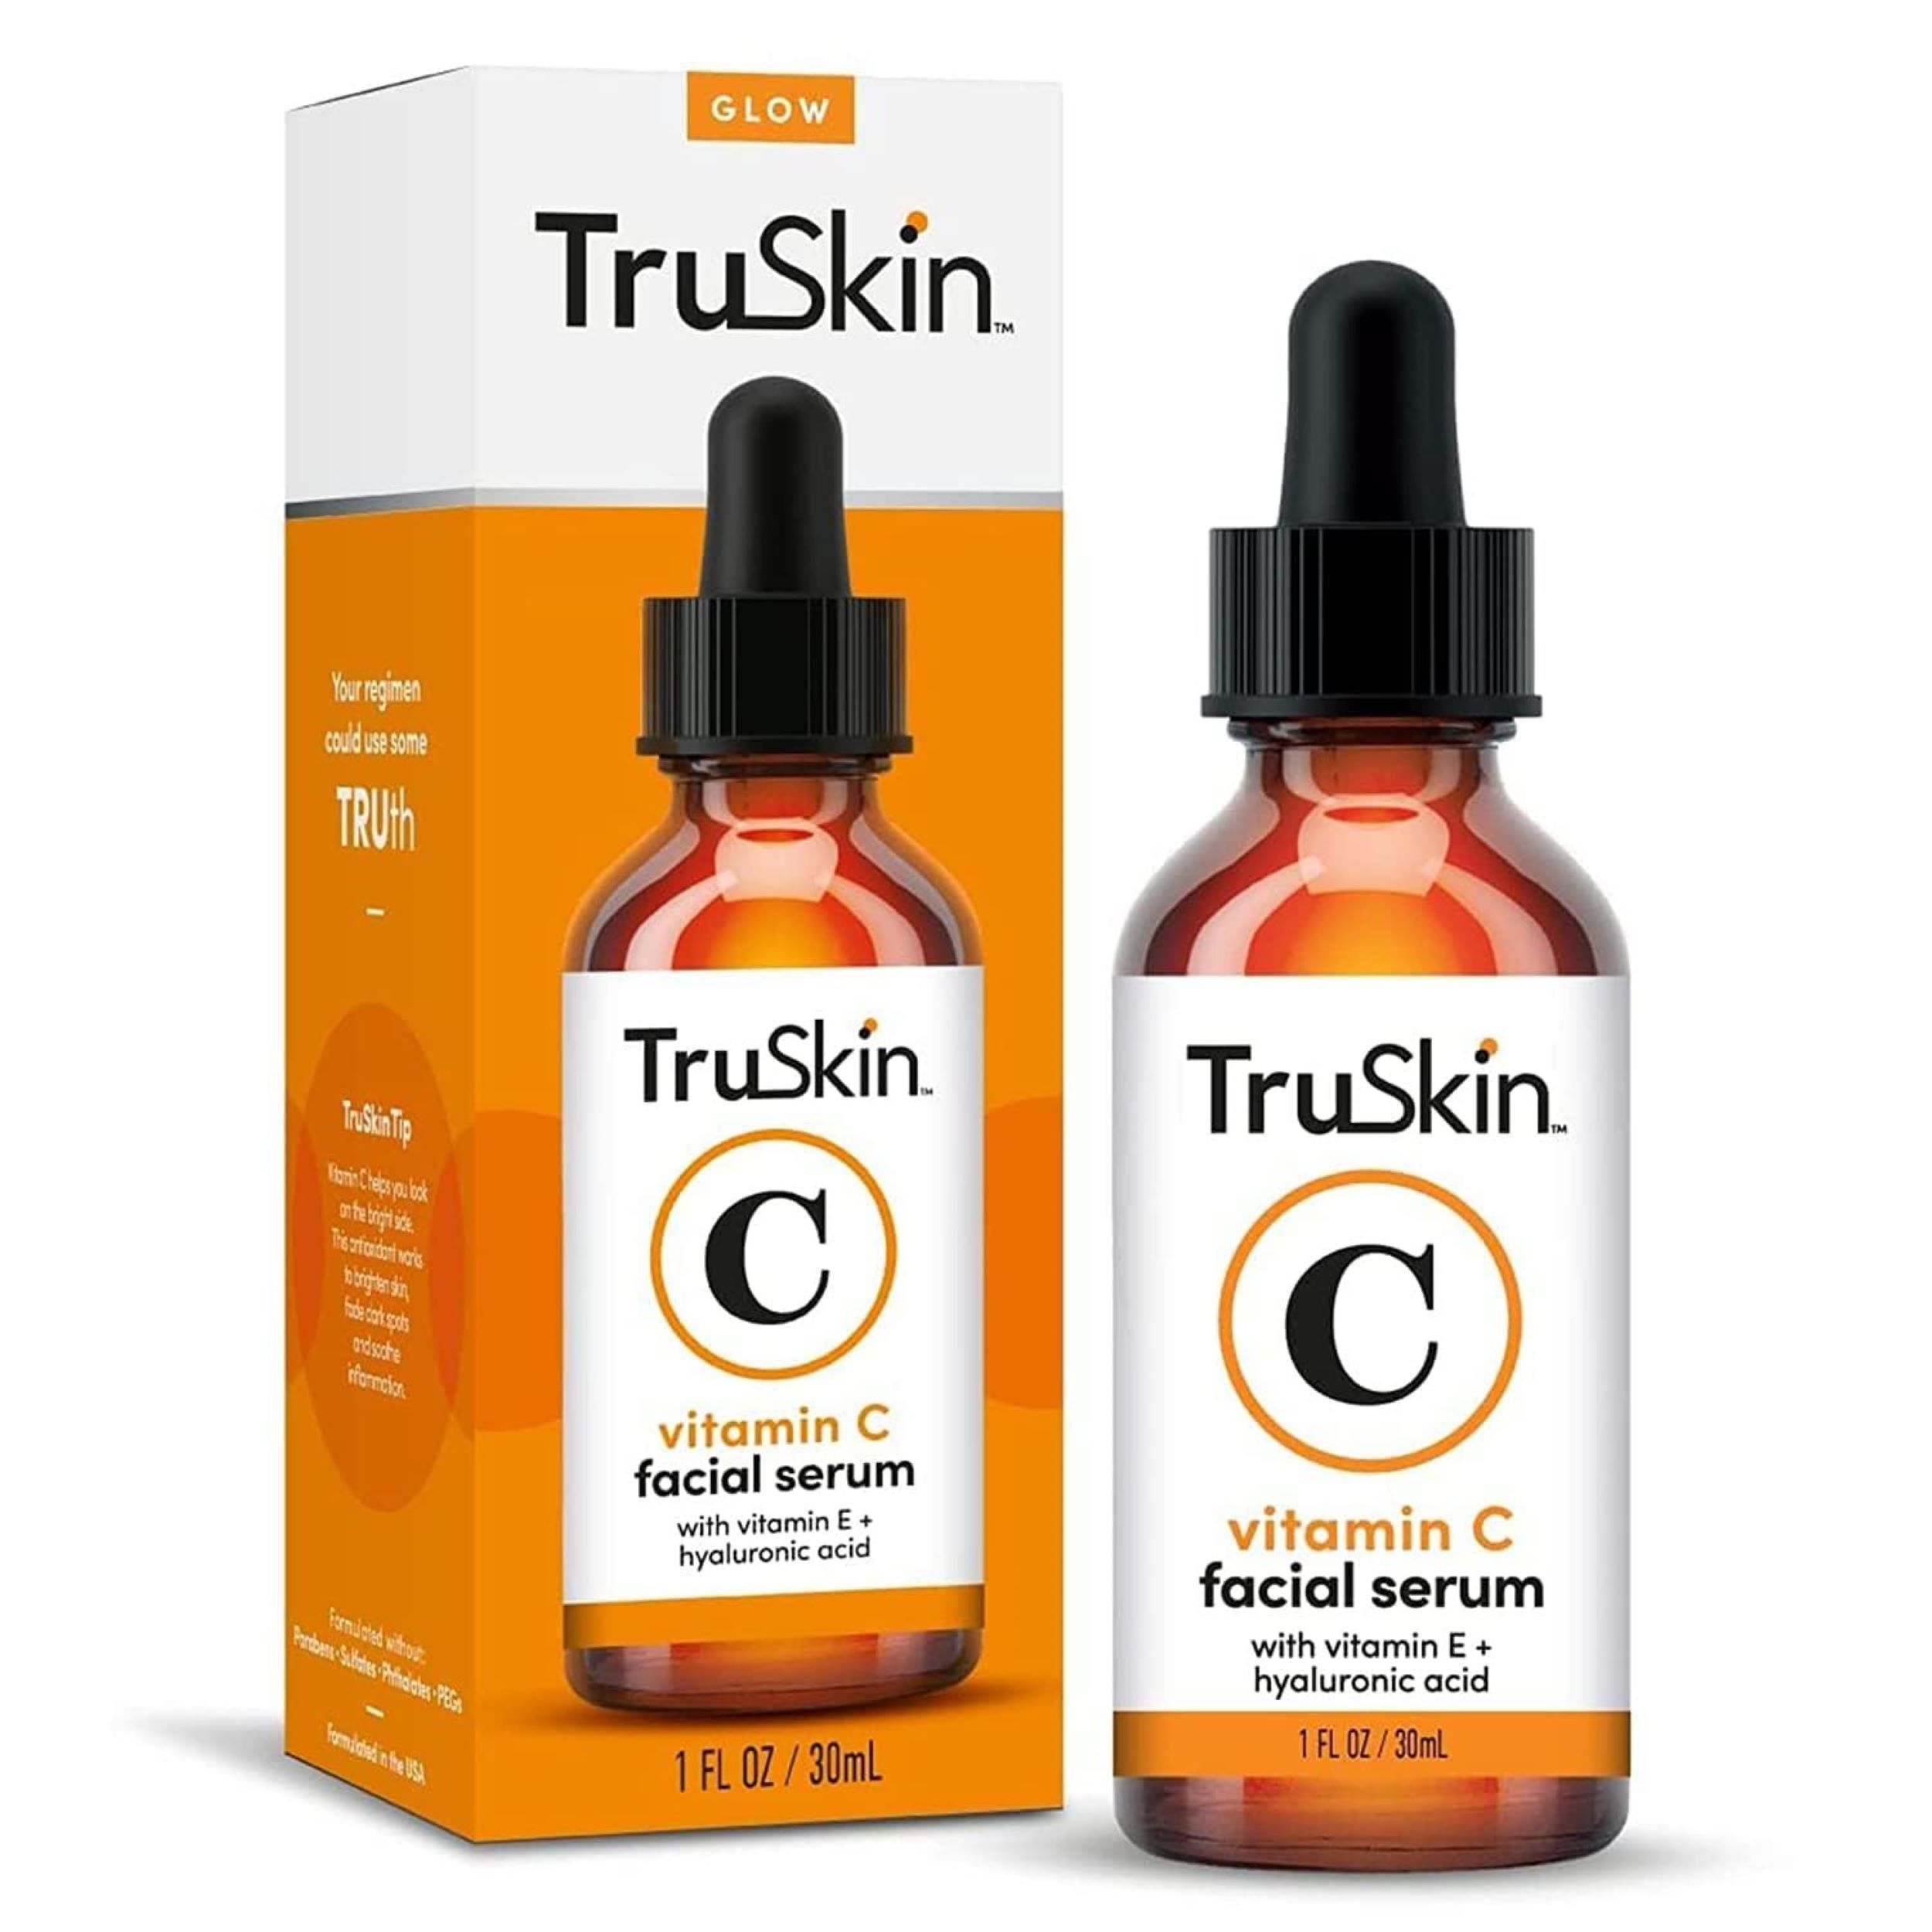 TruSkin Vitamin C Serum for Face – Anti Aging Face Serum with Vitamin C, Hyaluronic Acid, All Skin Types, 1 fl oz - image 1 of 12